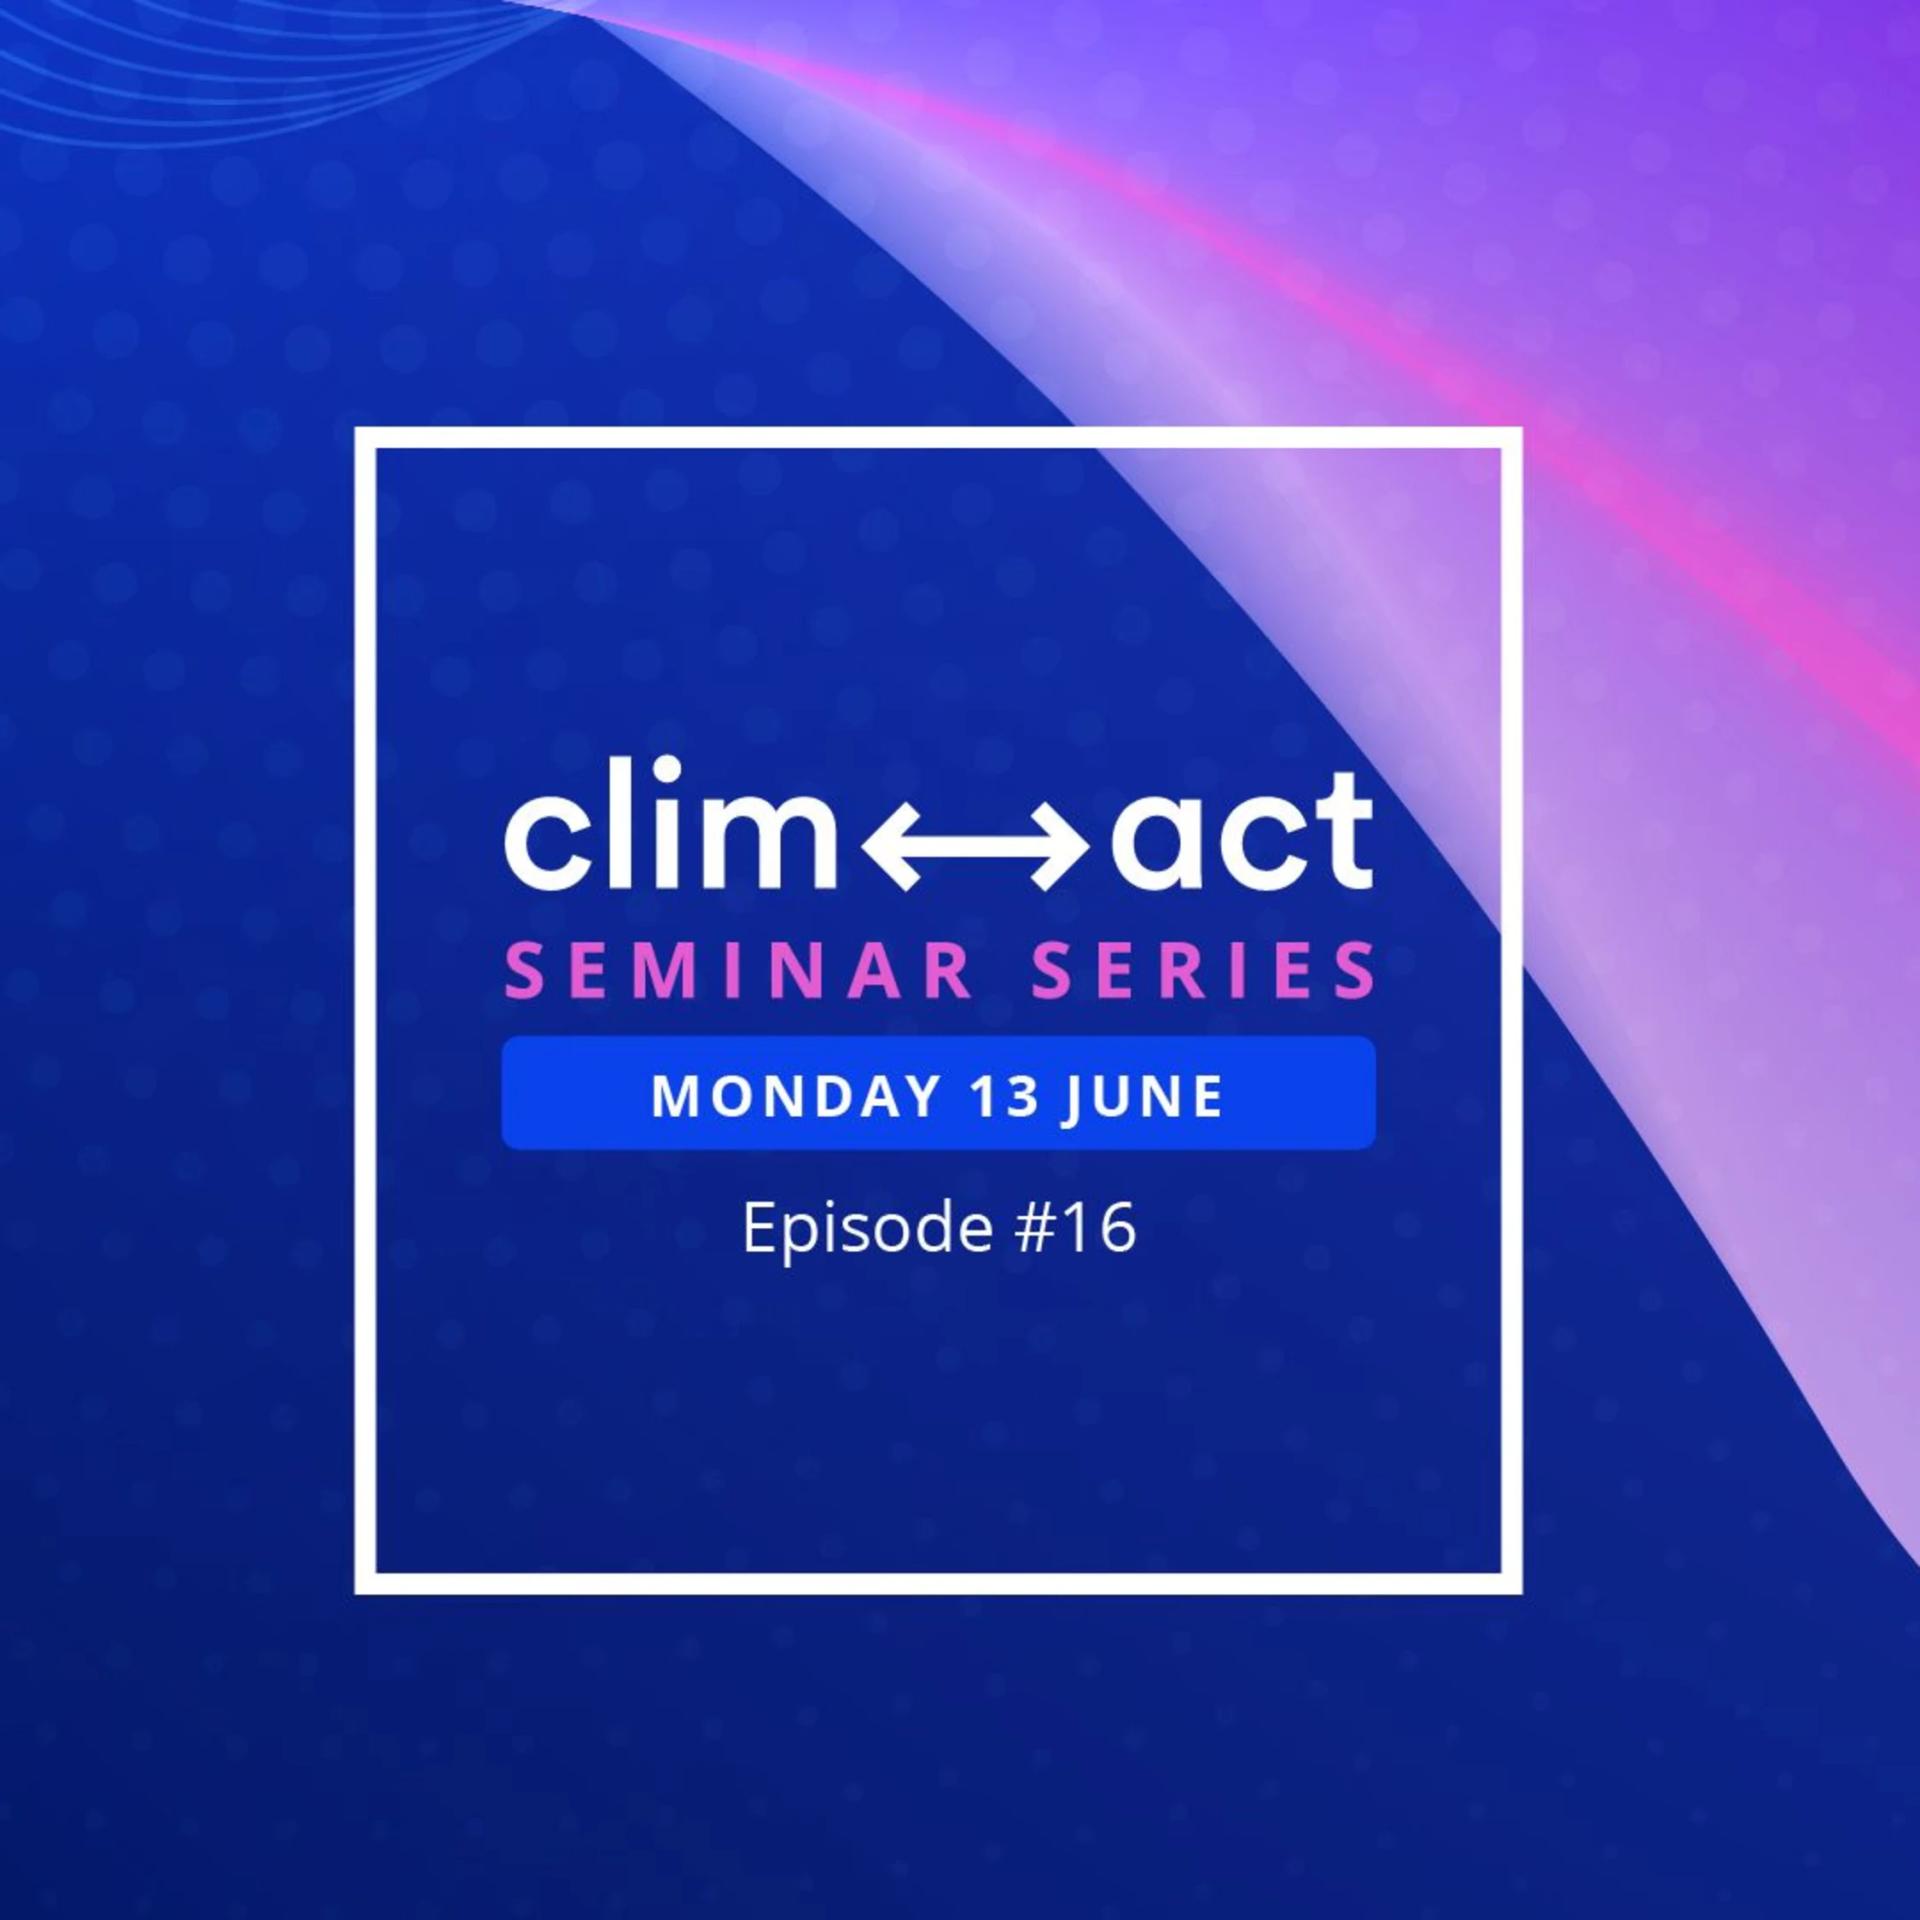 #16 CLIMACT SEMINAR SERIES How to move forward and act on climate change